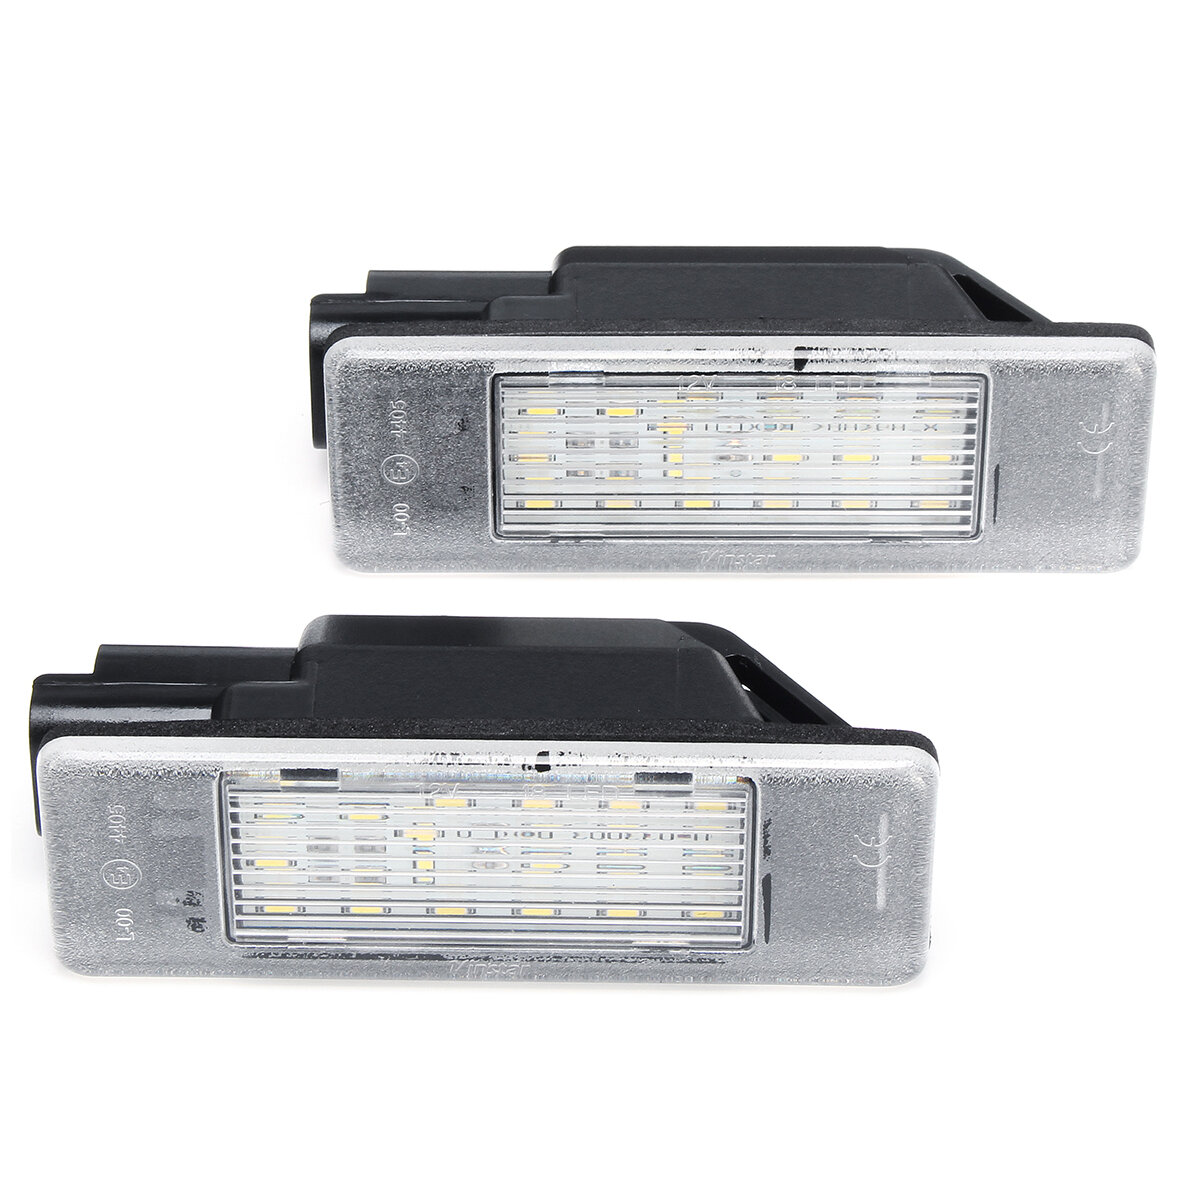 2PCS LED License Plate Light For Mercedes-Benz Sprinter W906 Vito Viano W639 2006-on